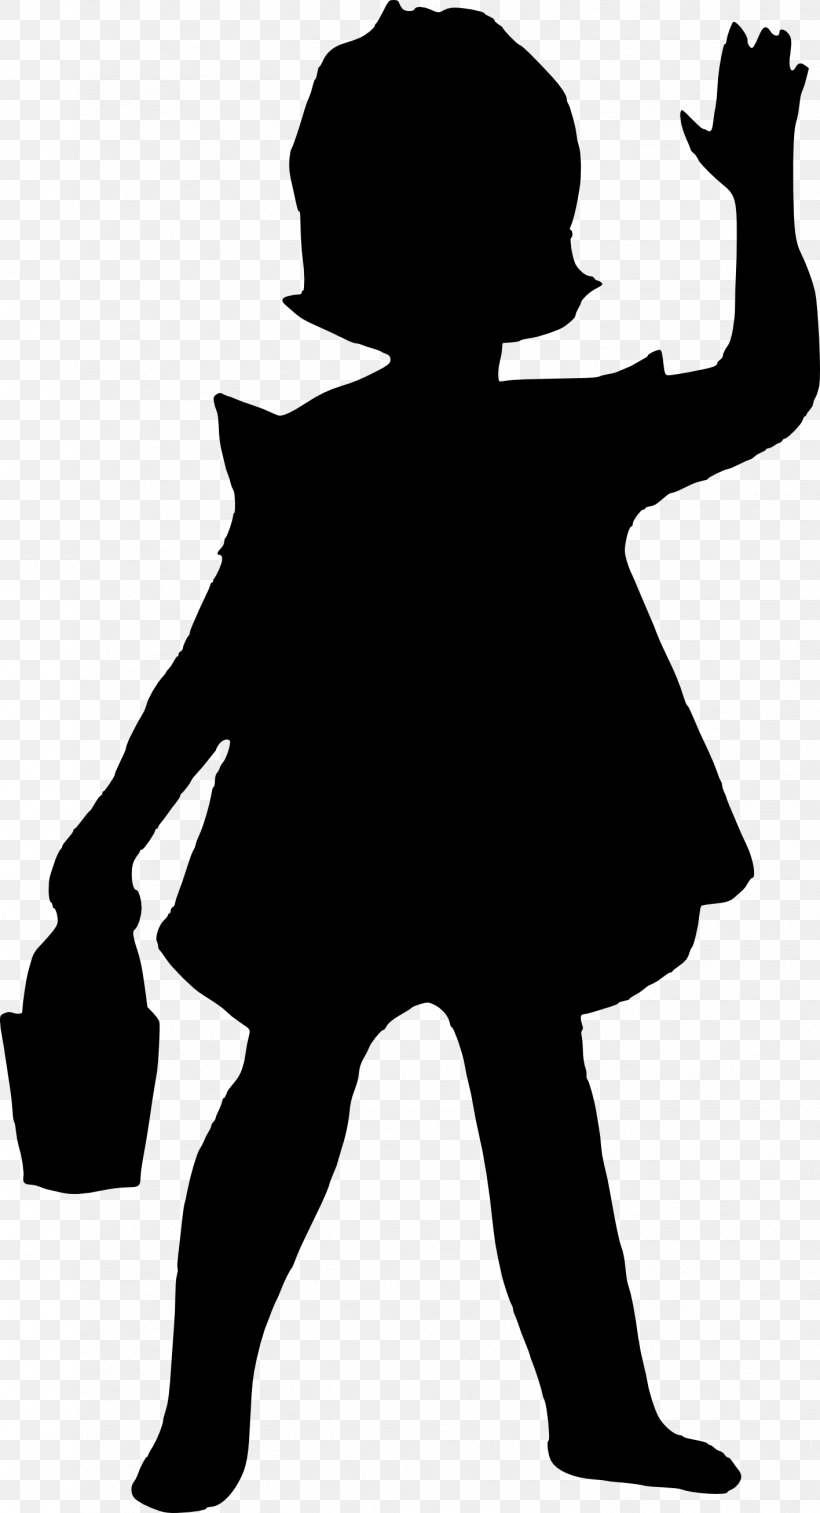 Silhouette Black And White Monochrome Photography, PNG, 1416x2613px, Silhouette, Black, Black And White, Fictional Character, Hand Download Free